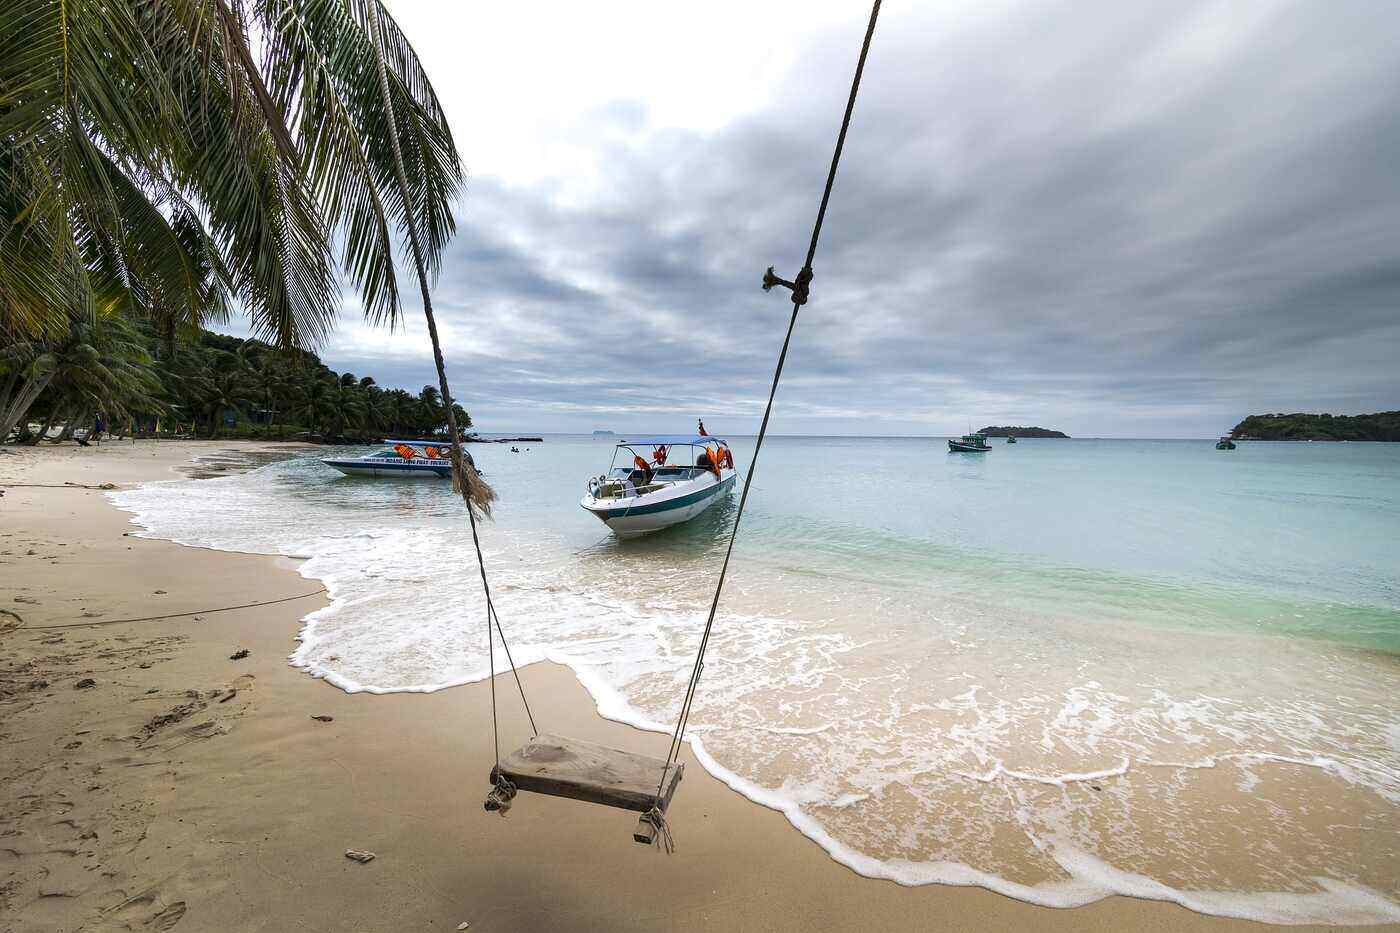 Swing on beach near palm tree - How to hang a swing from a tree without branches